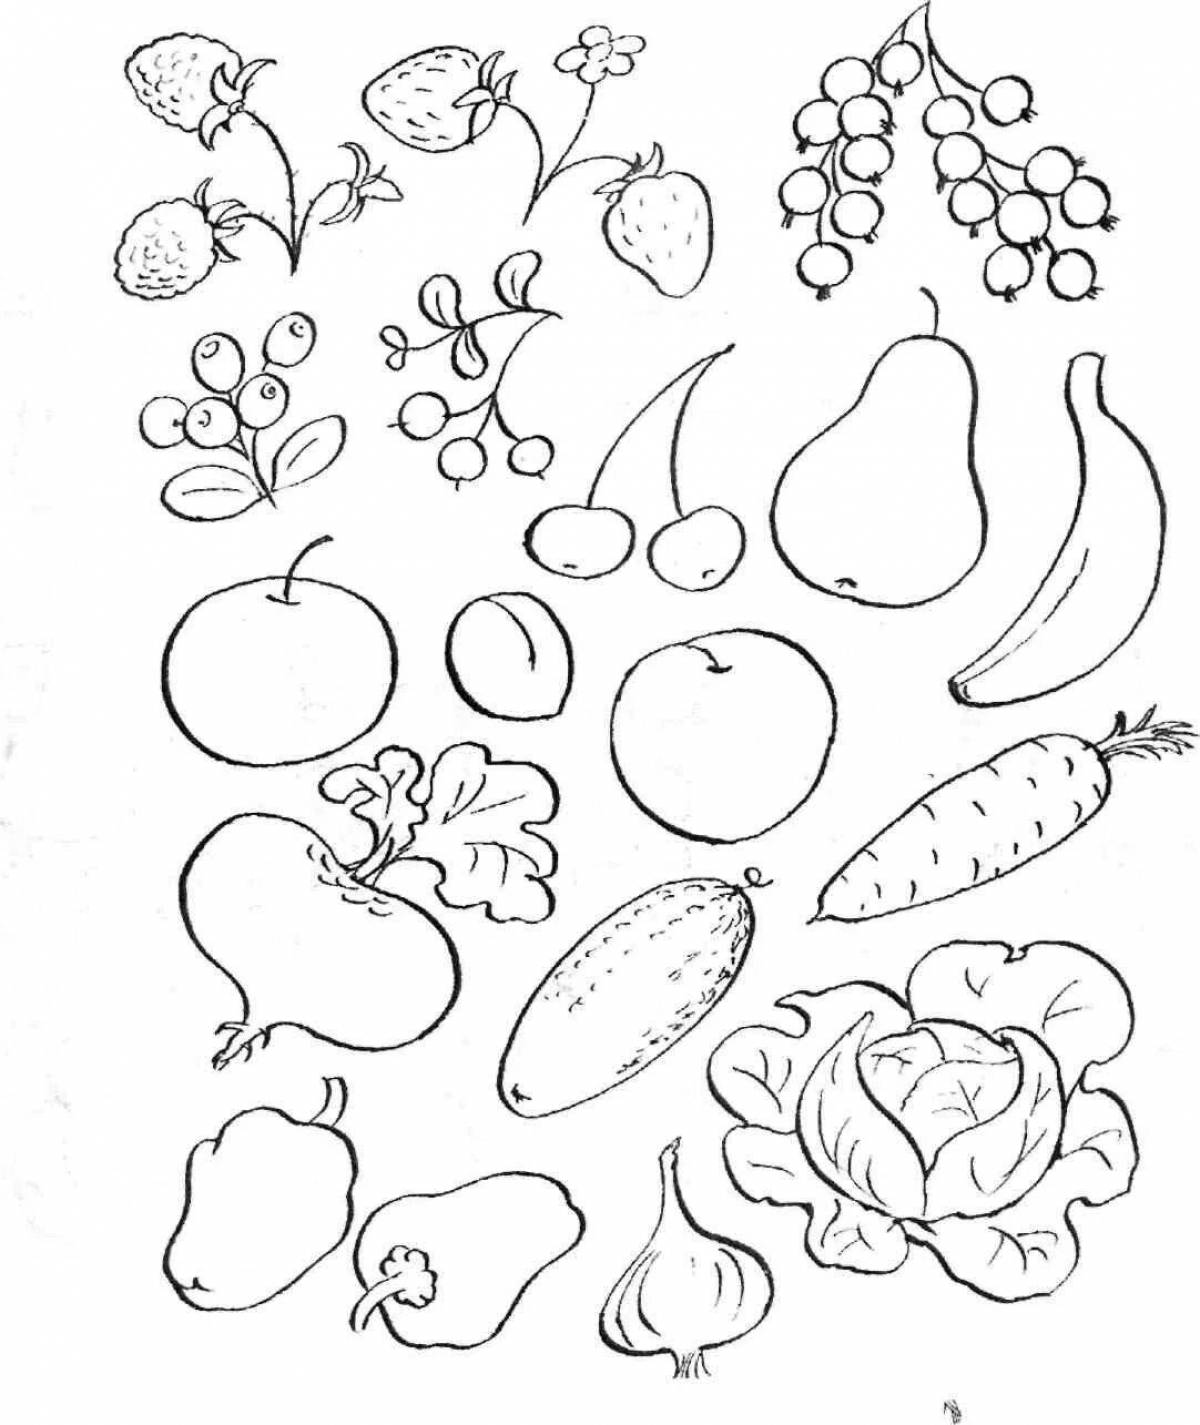 Crispy fruit and vegetable coloring pages